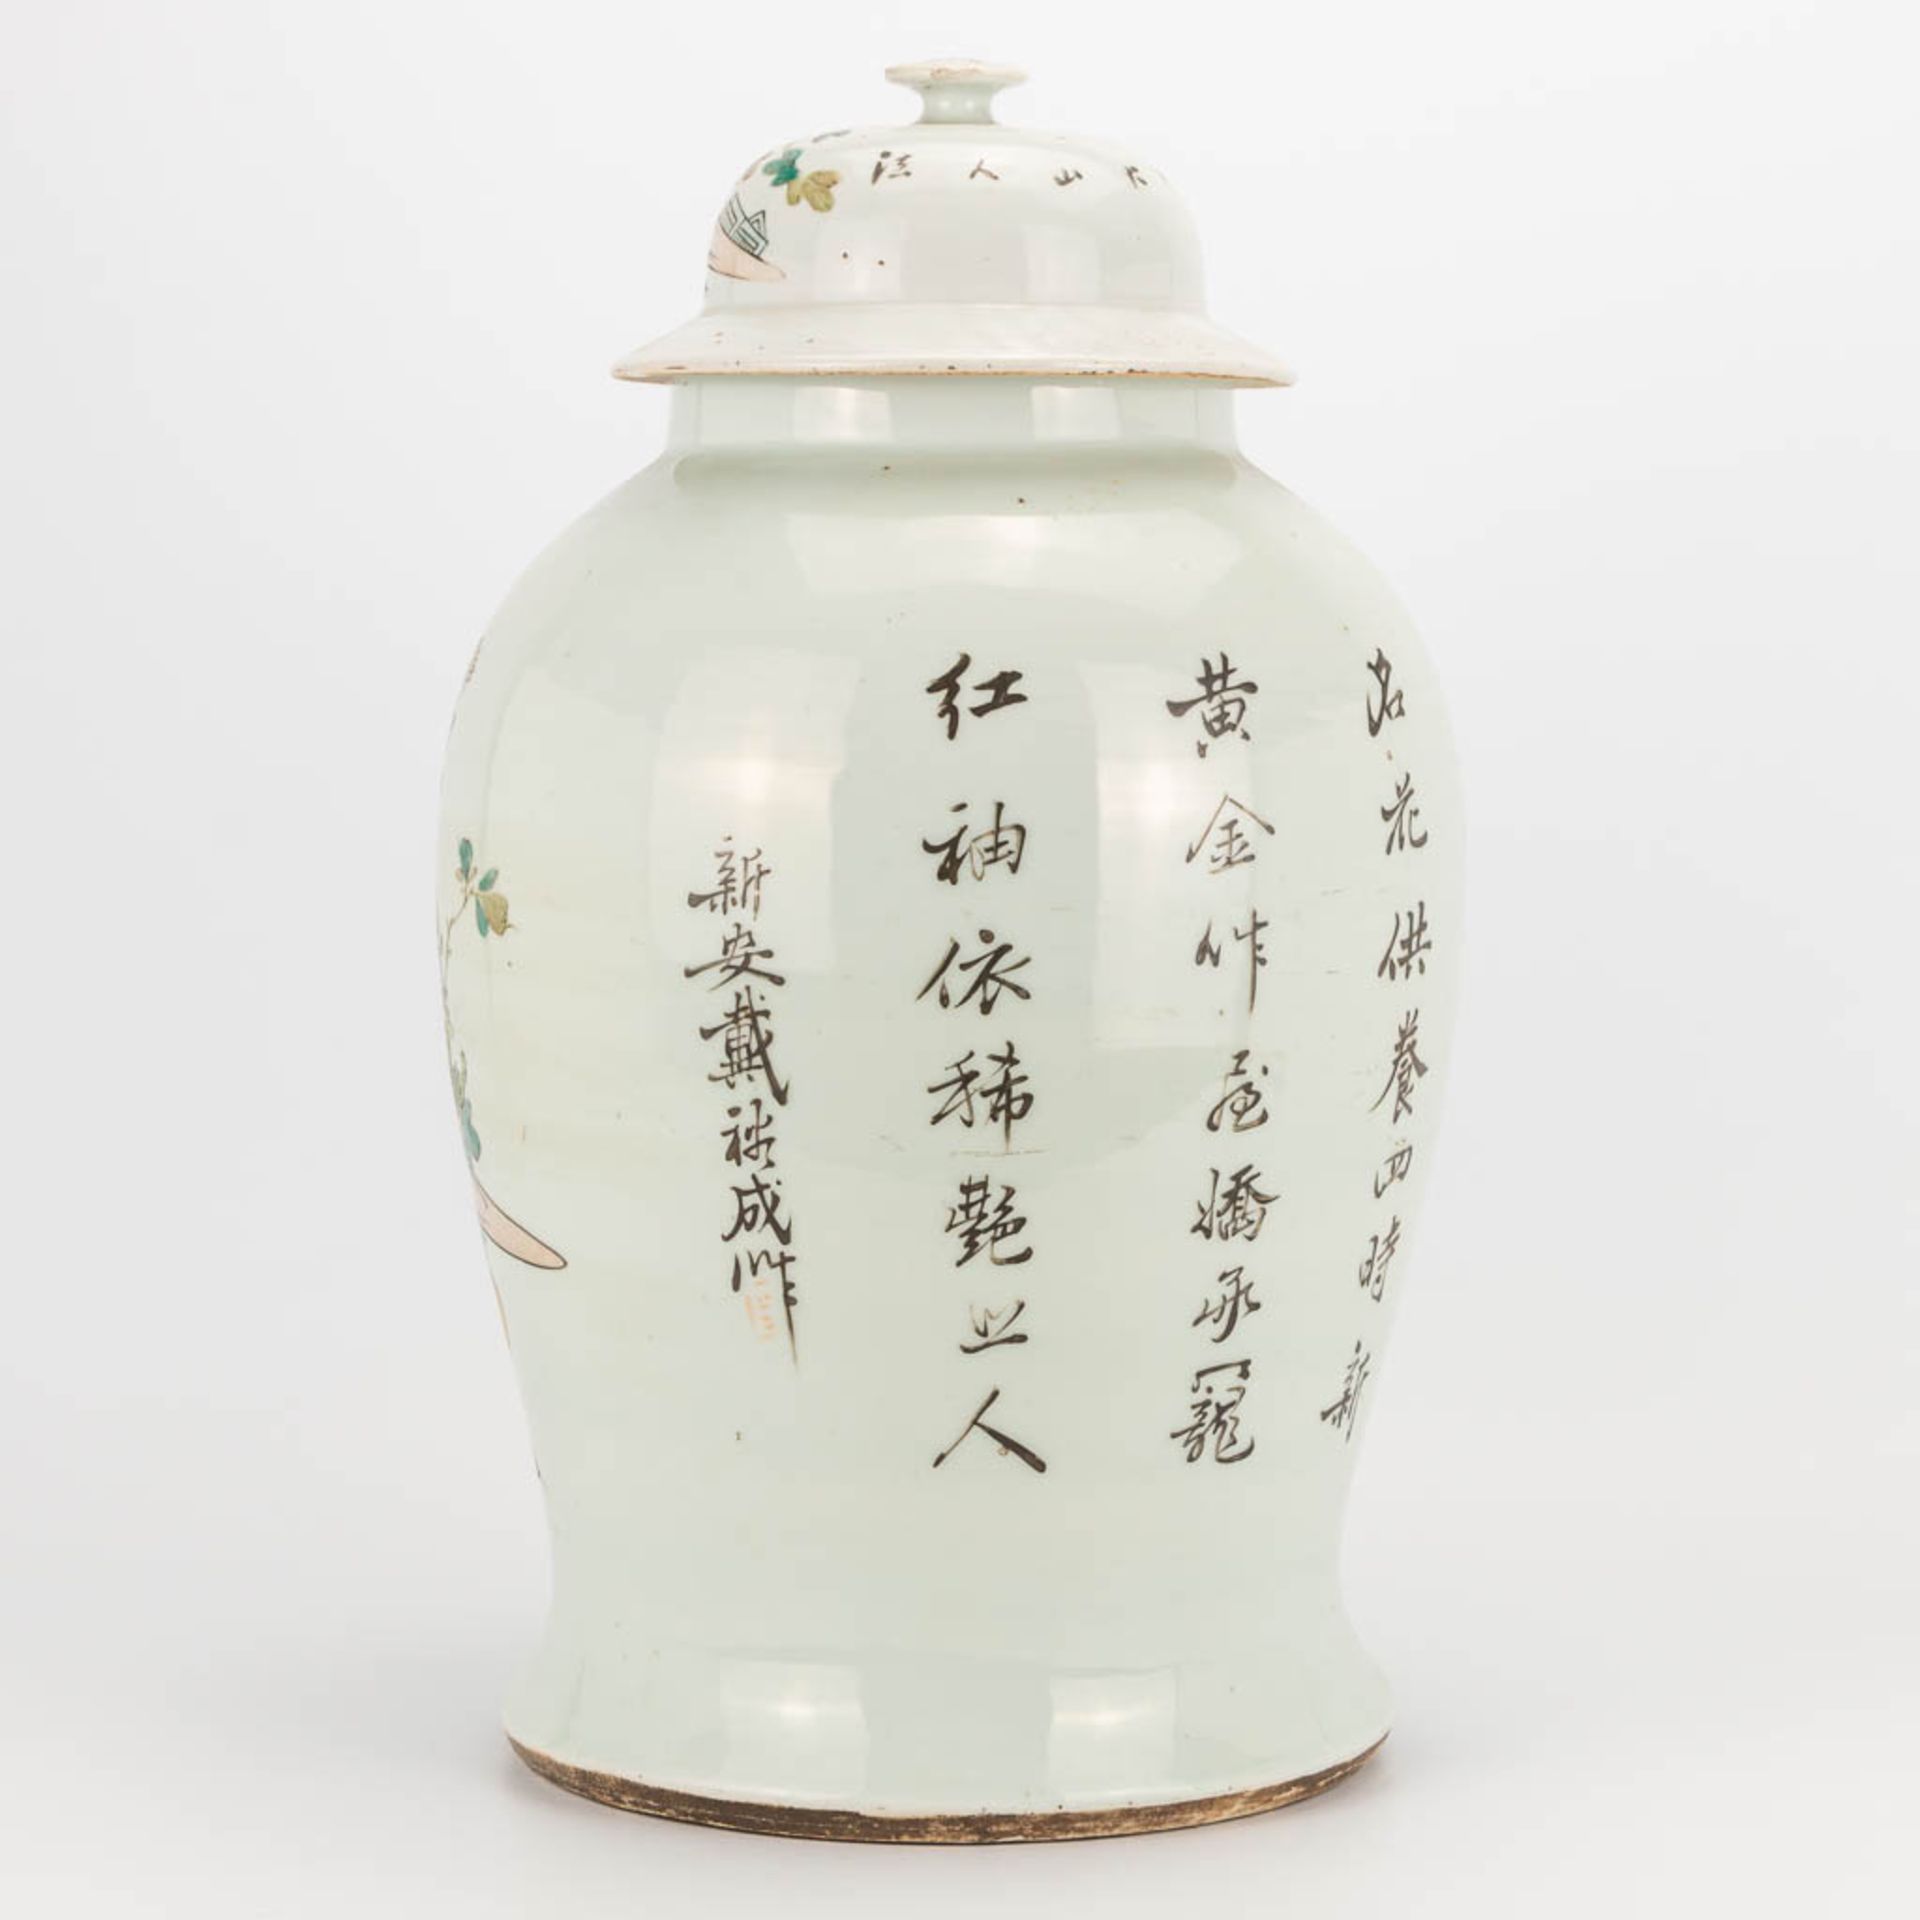 A Chinese porcelain vase with lid, decor of 100 antiquities. 19th/20th century. (43 x 27 cm) - Image 4 of 20